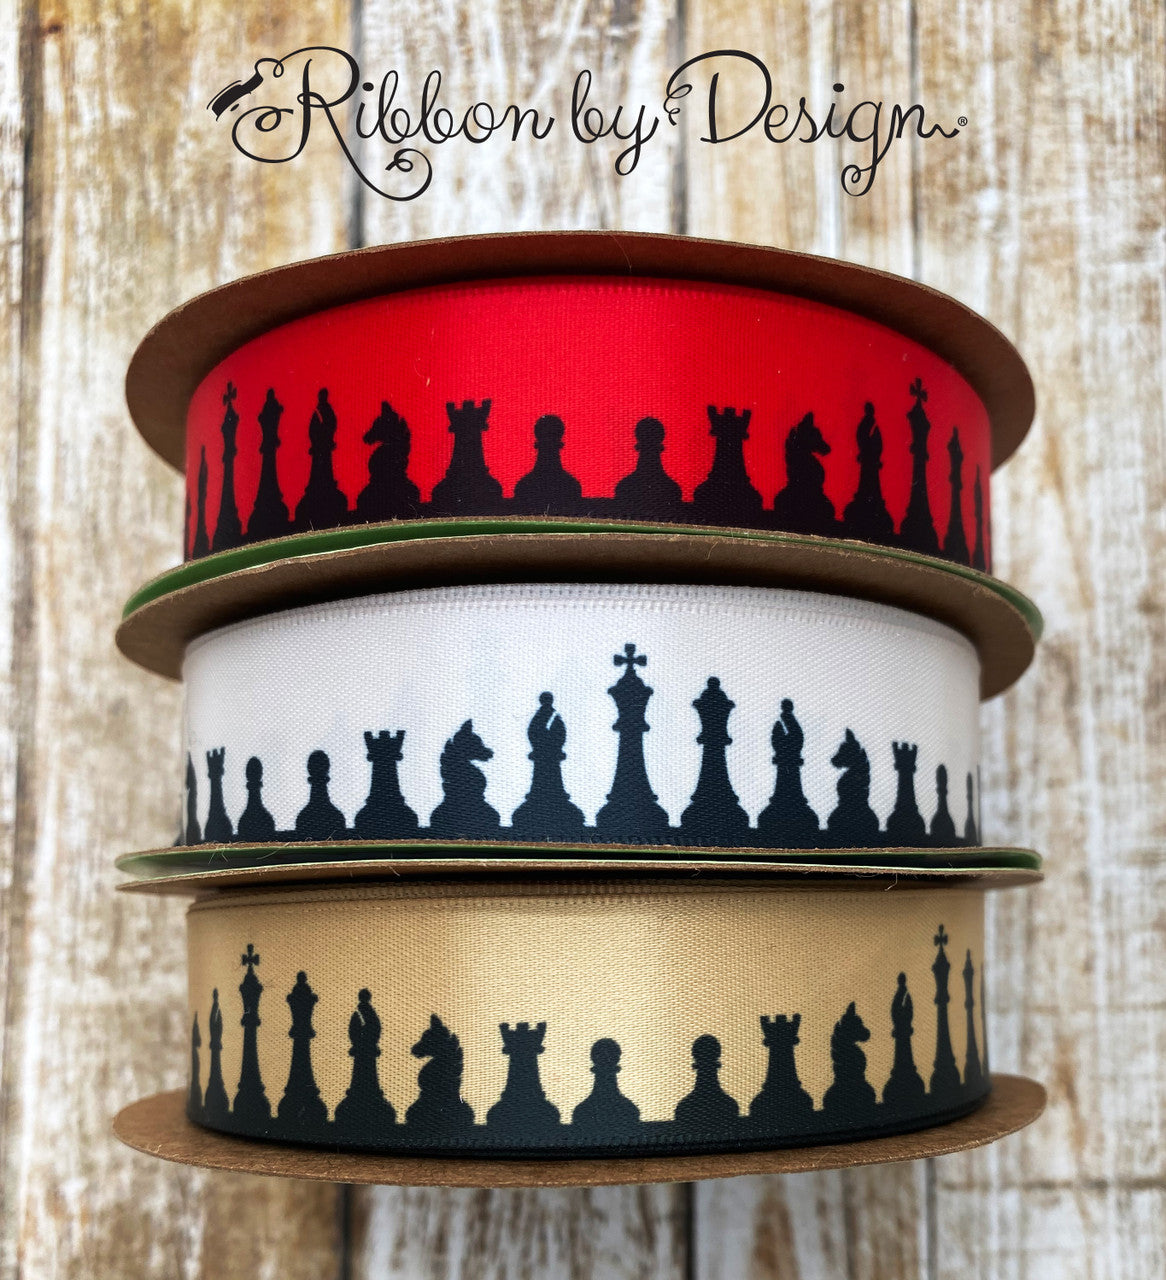 Our chess themed ribbon comes in a trio of colors for all your craft and gifting creativity!